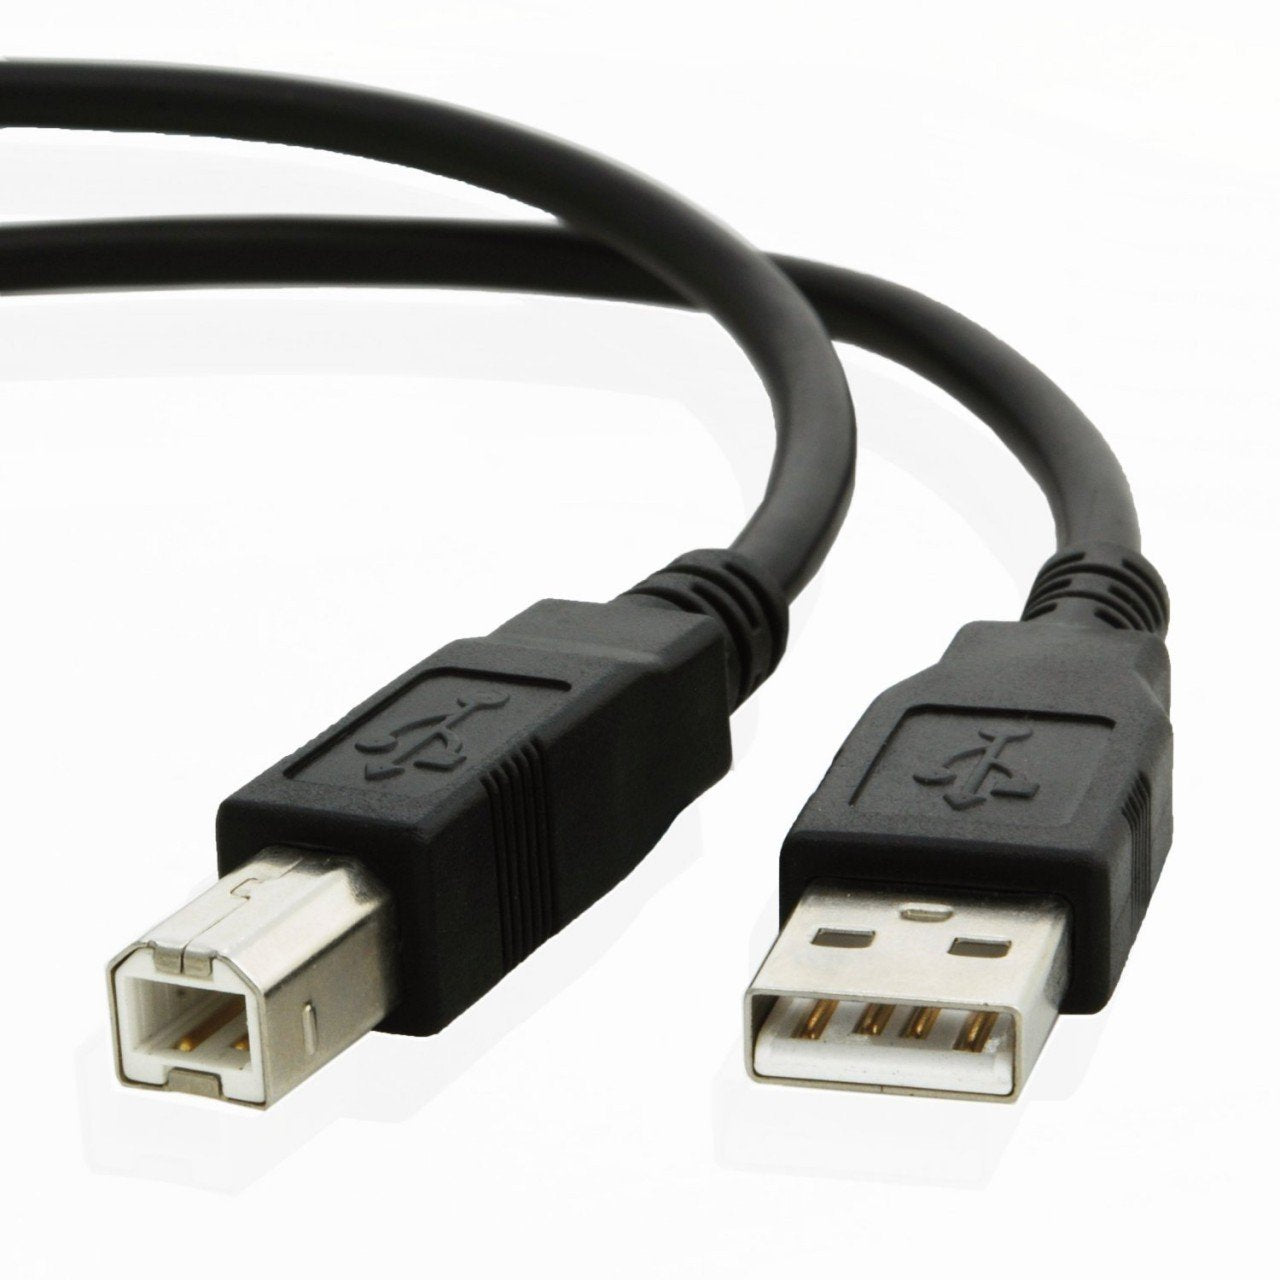 USB cable for Casio LIGHTED KEYS LK-175